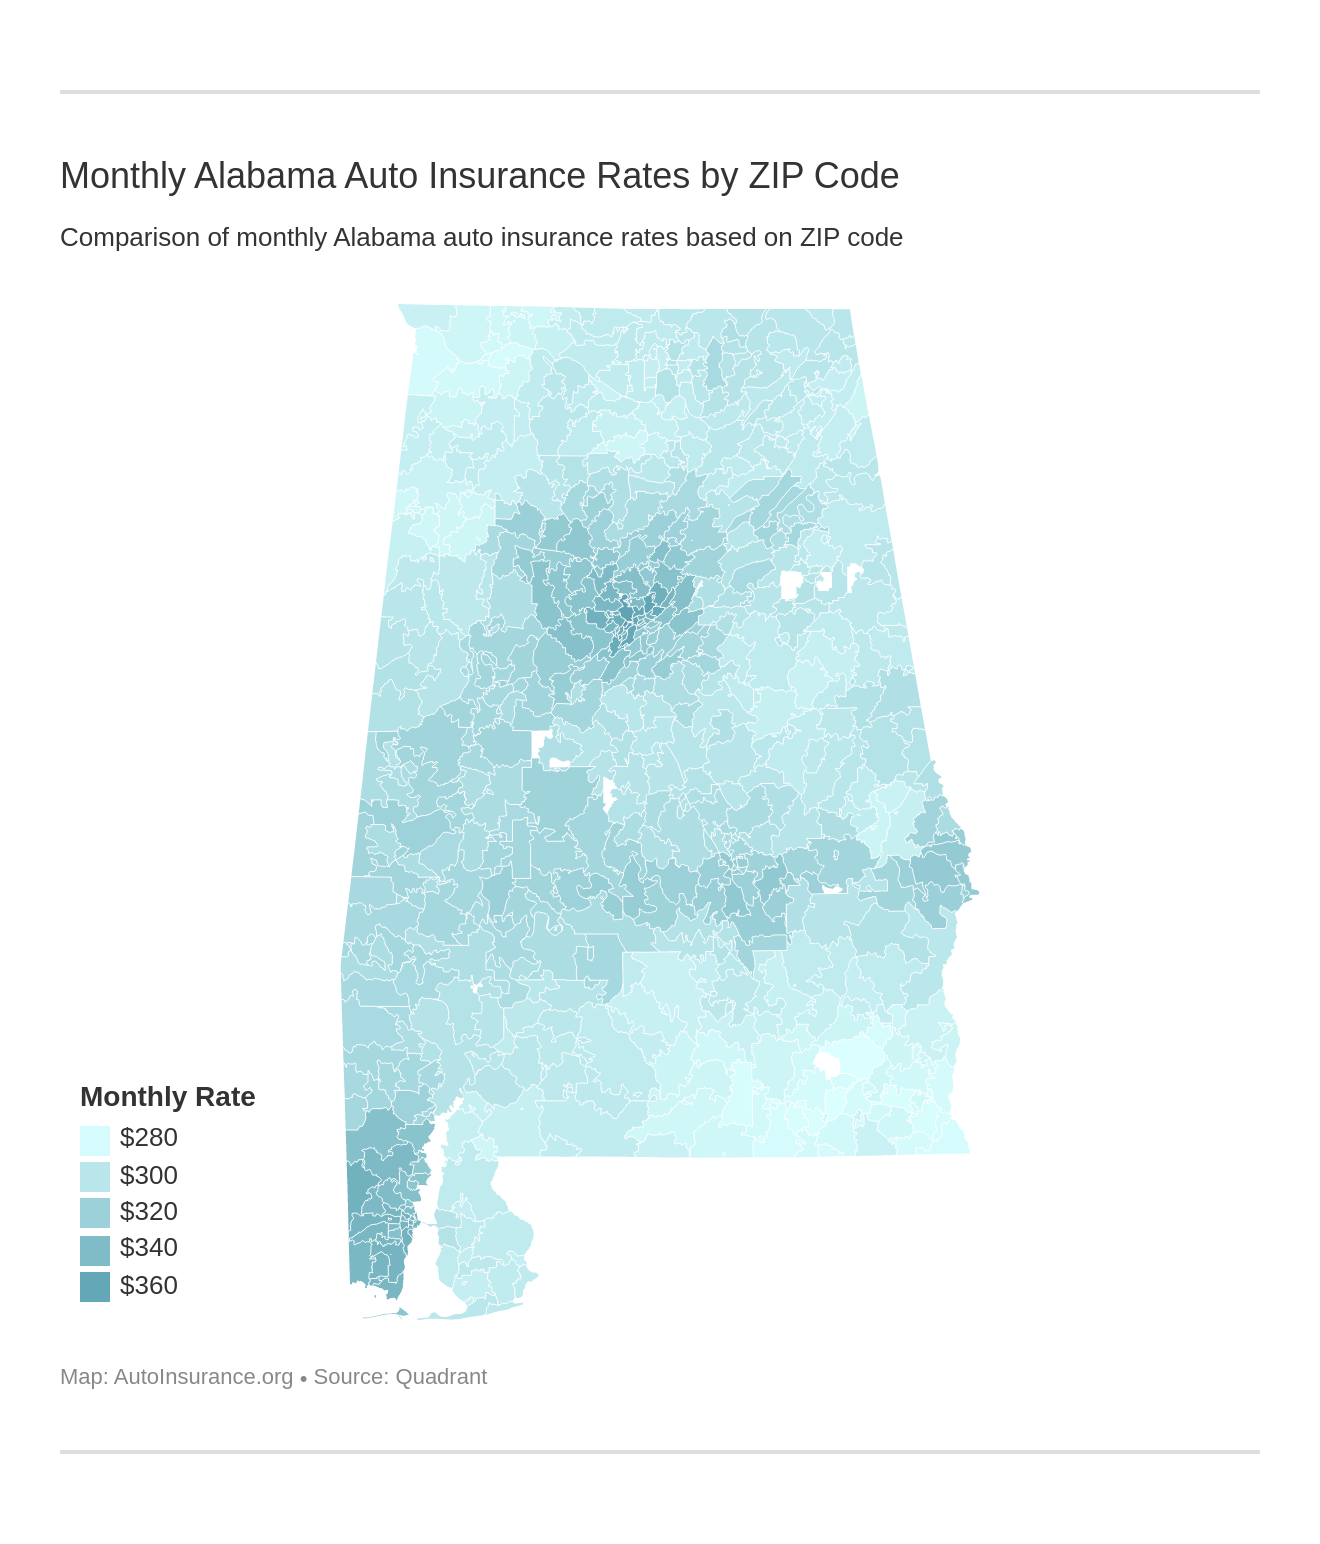 Monthly Alabama Auto Insurance Rates by ZIP Code